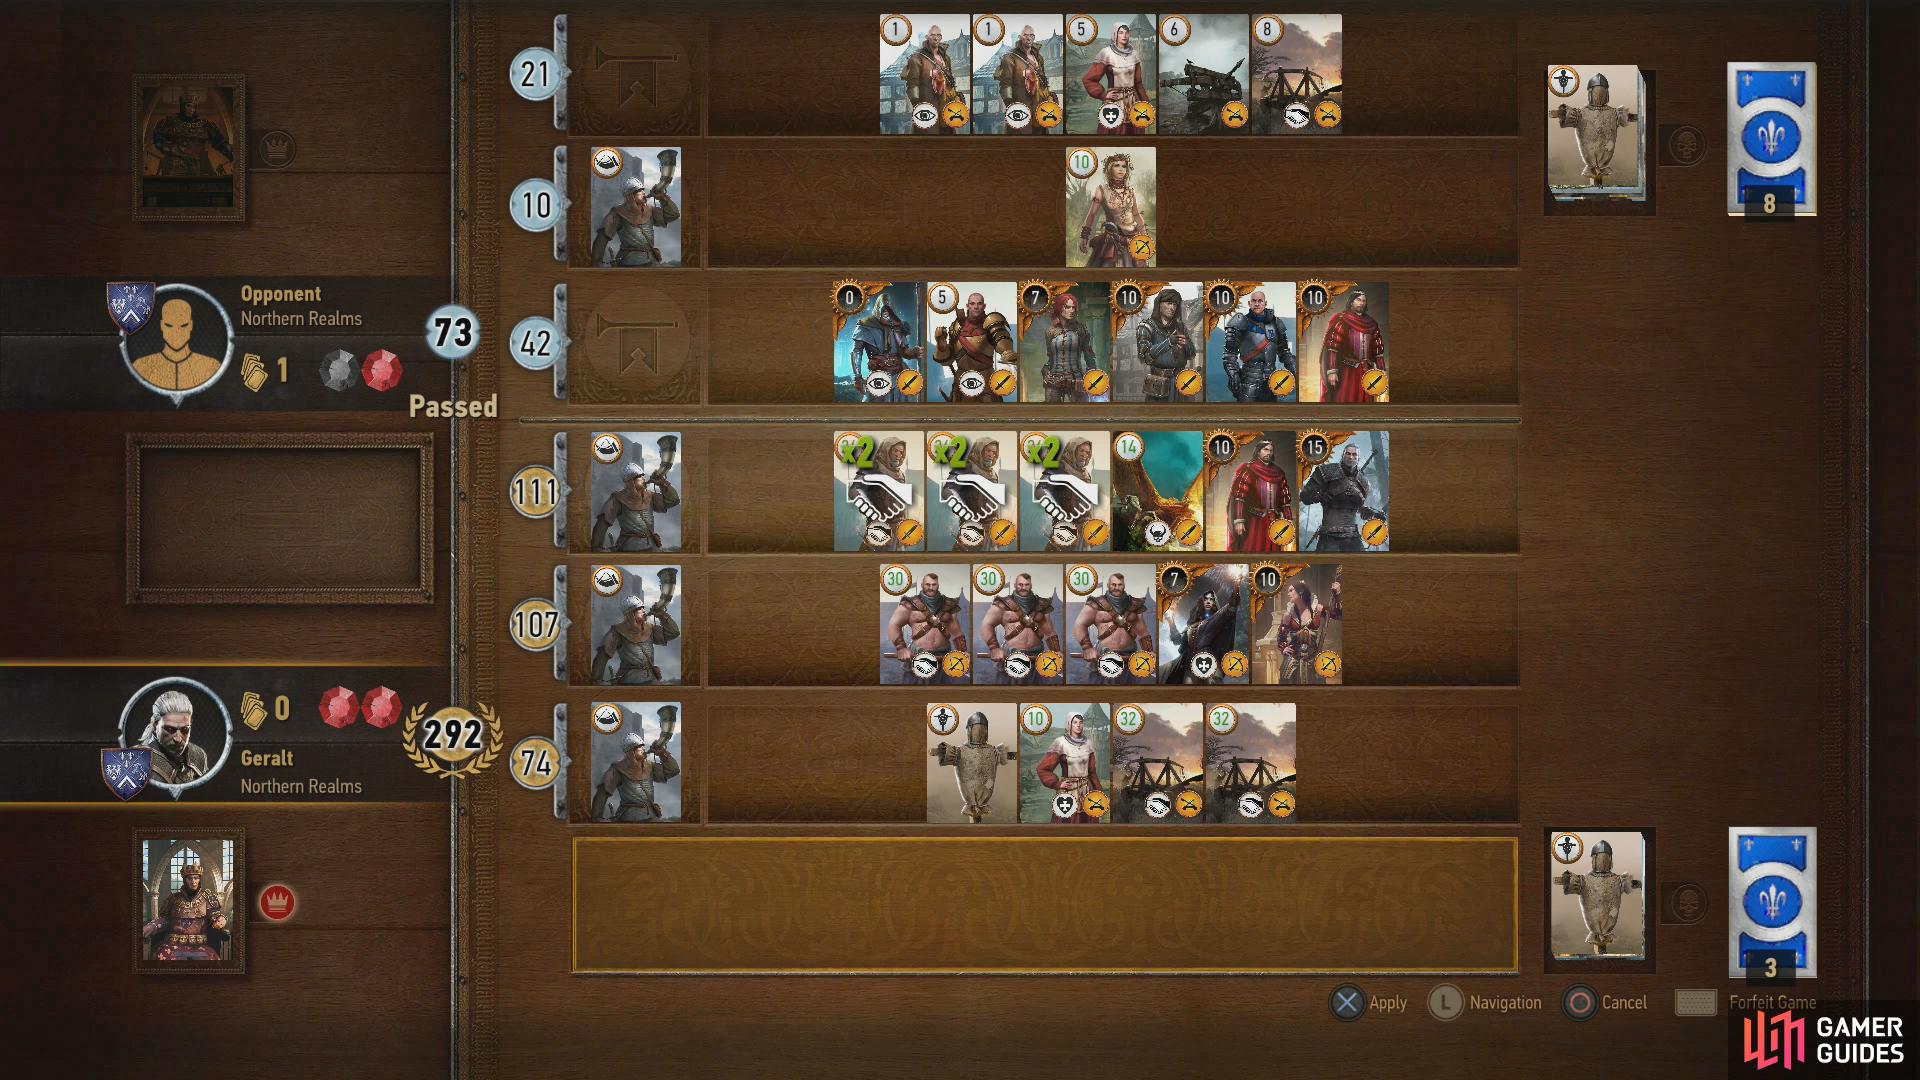 To expand your Skellige deck, you’ll need to defeat players across Toussaint.